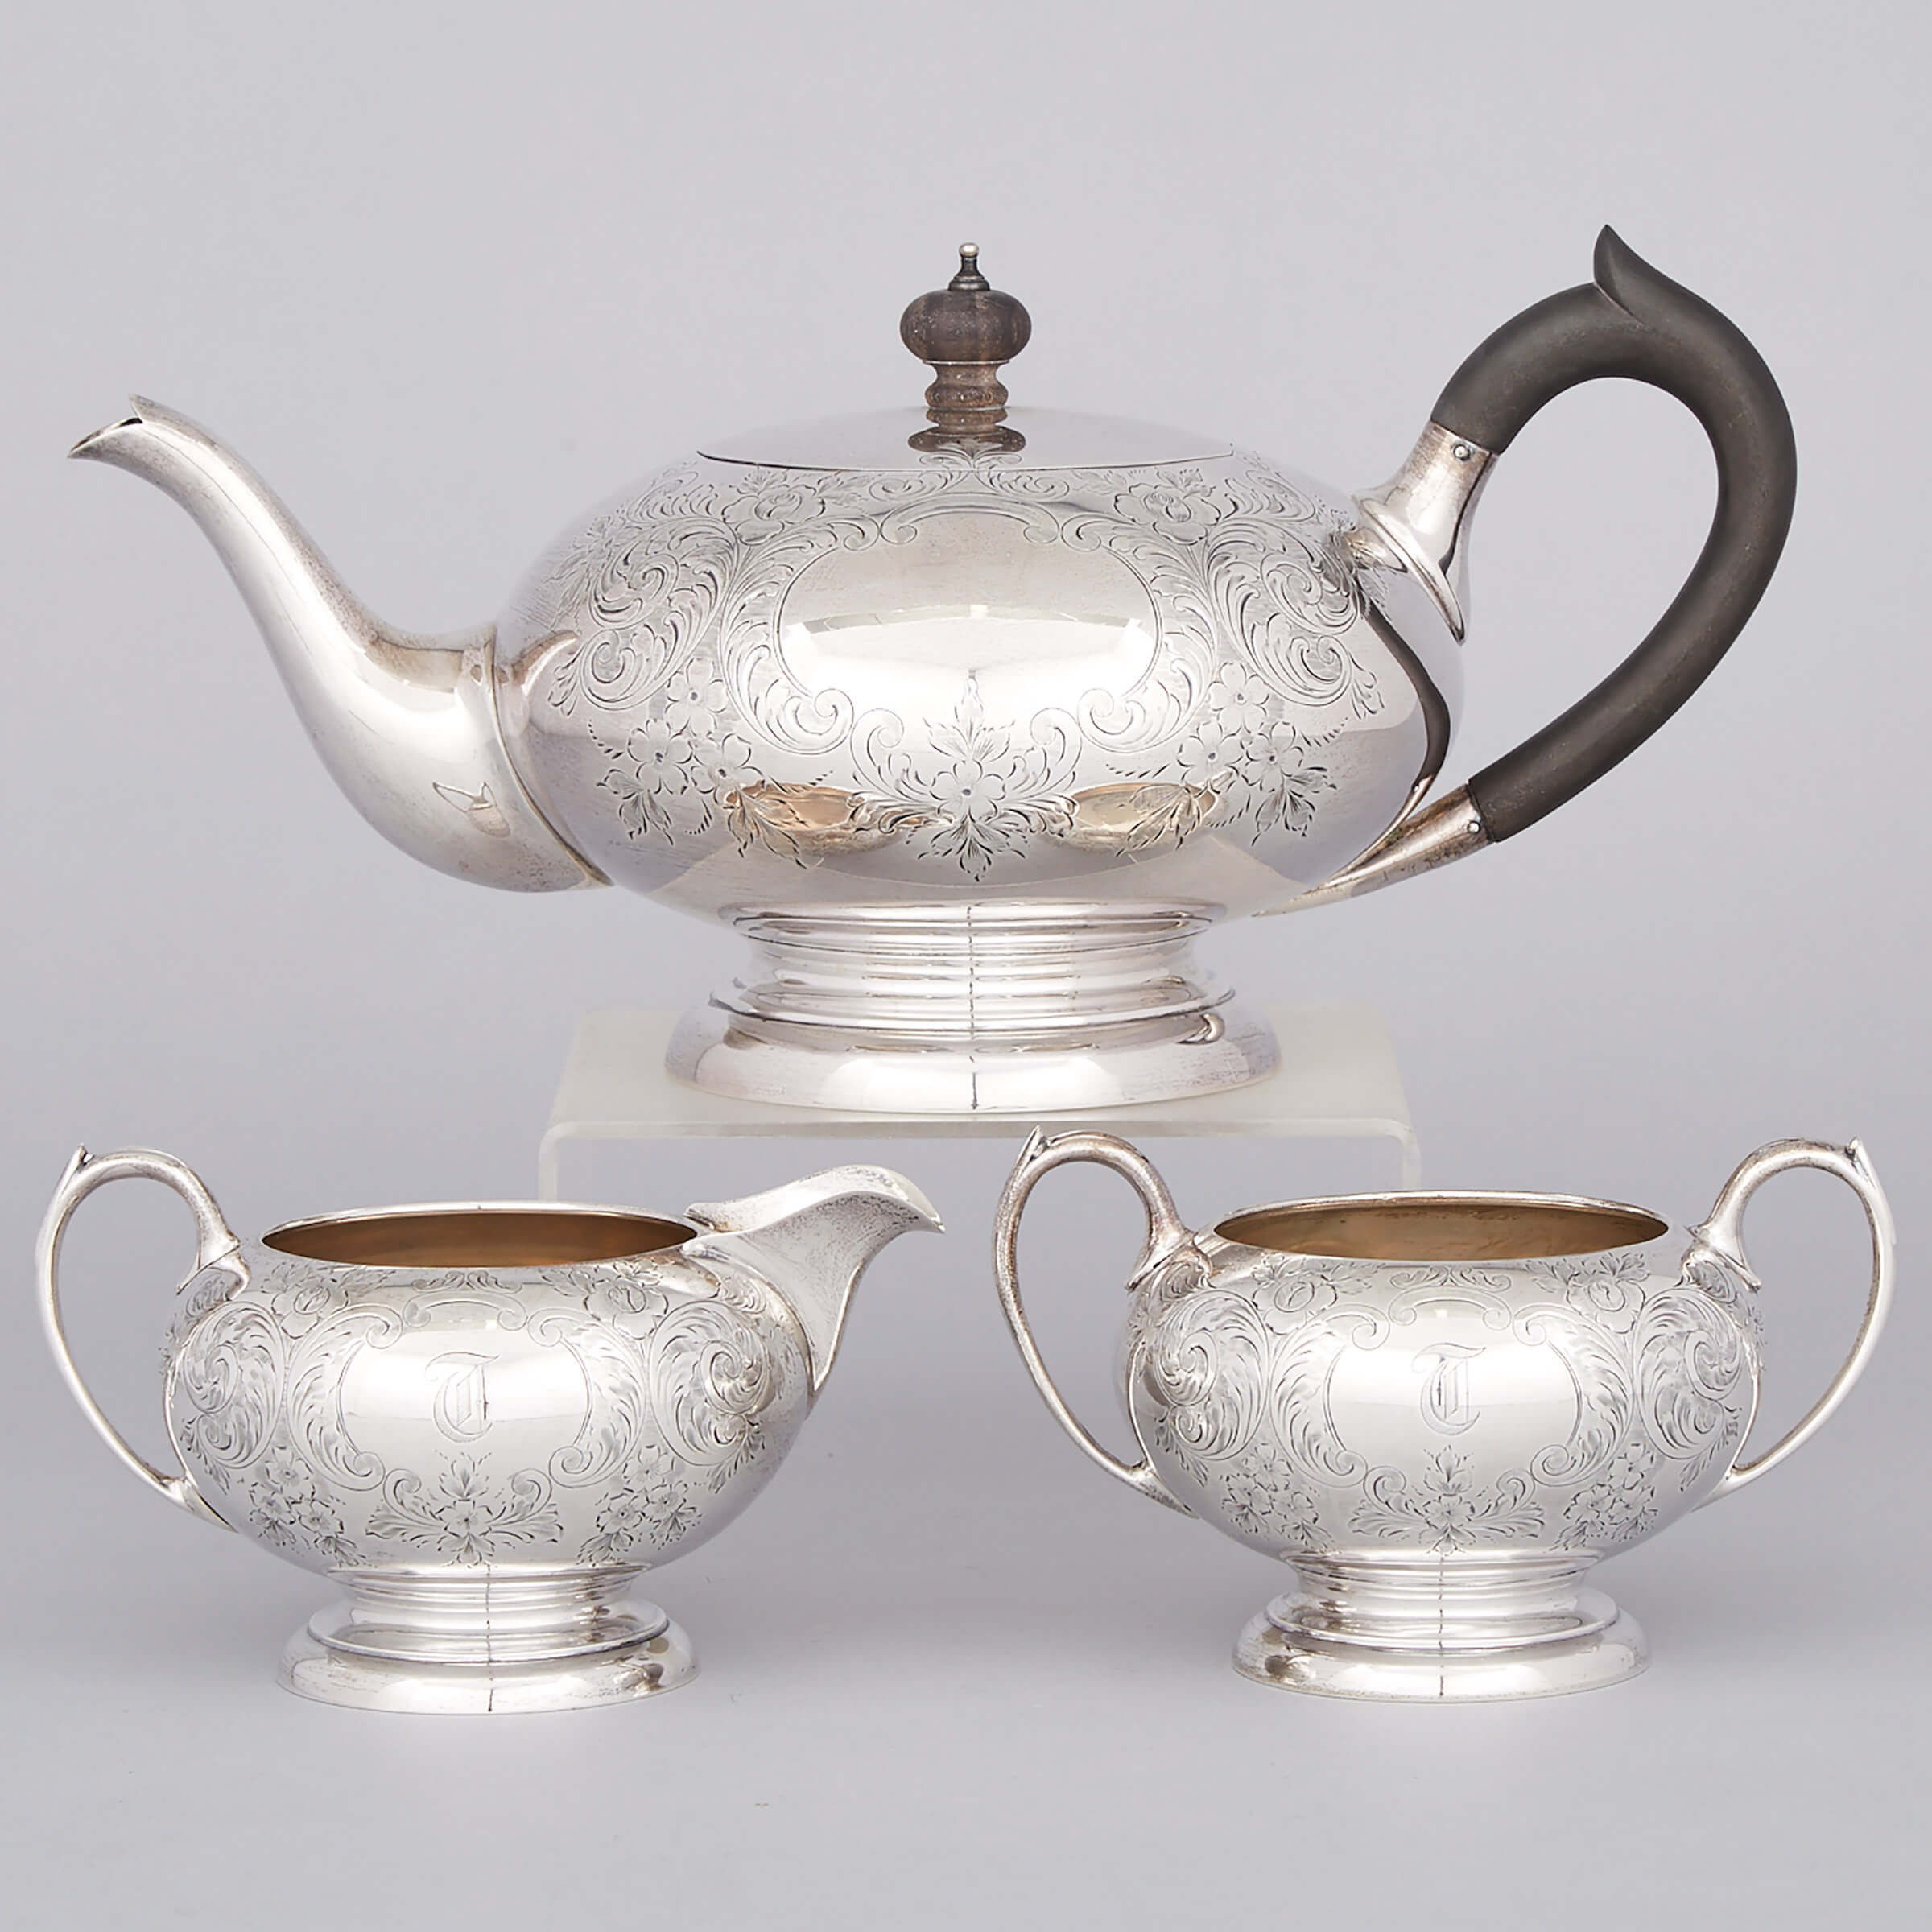 Canadian Silver Tea Service, Henry Birks & Sons, Montreal, Que., c.1904-24